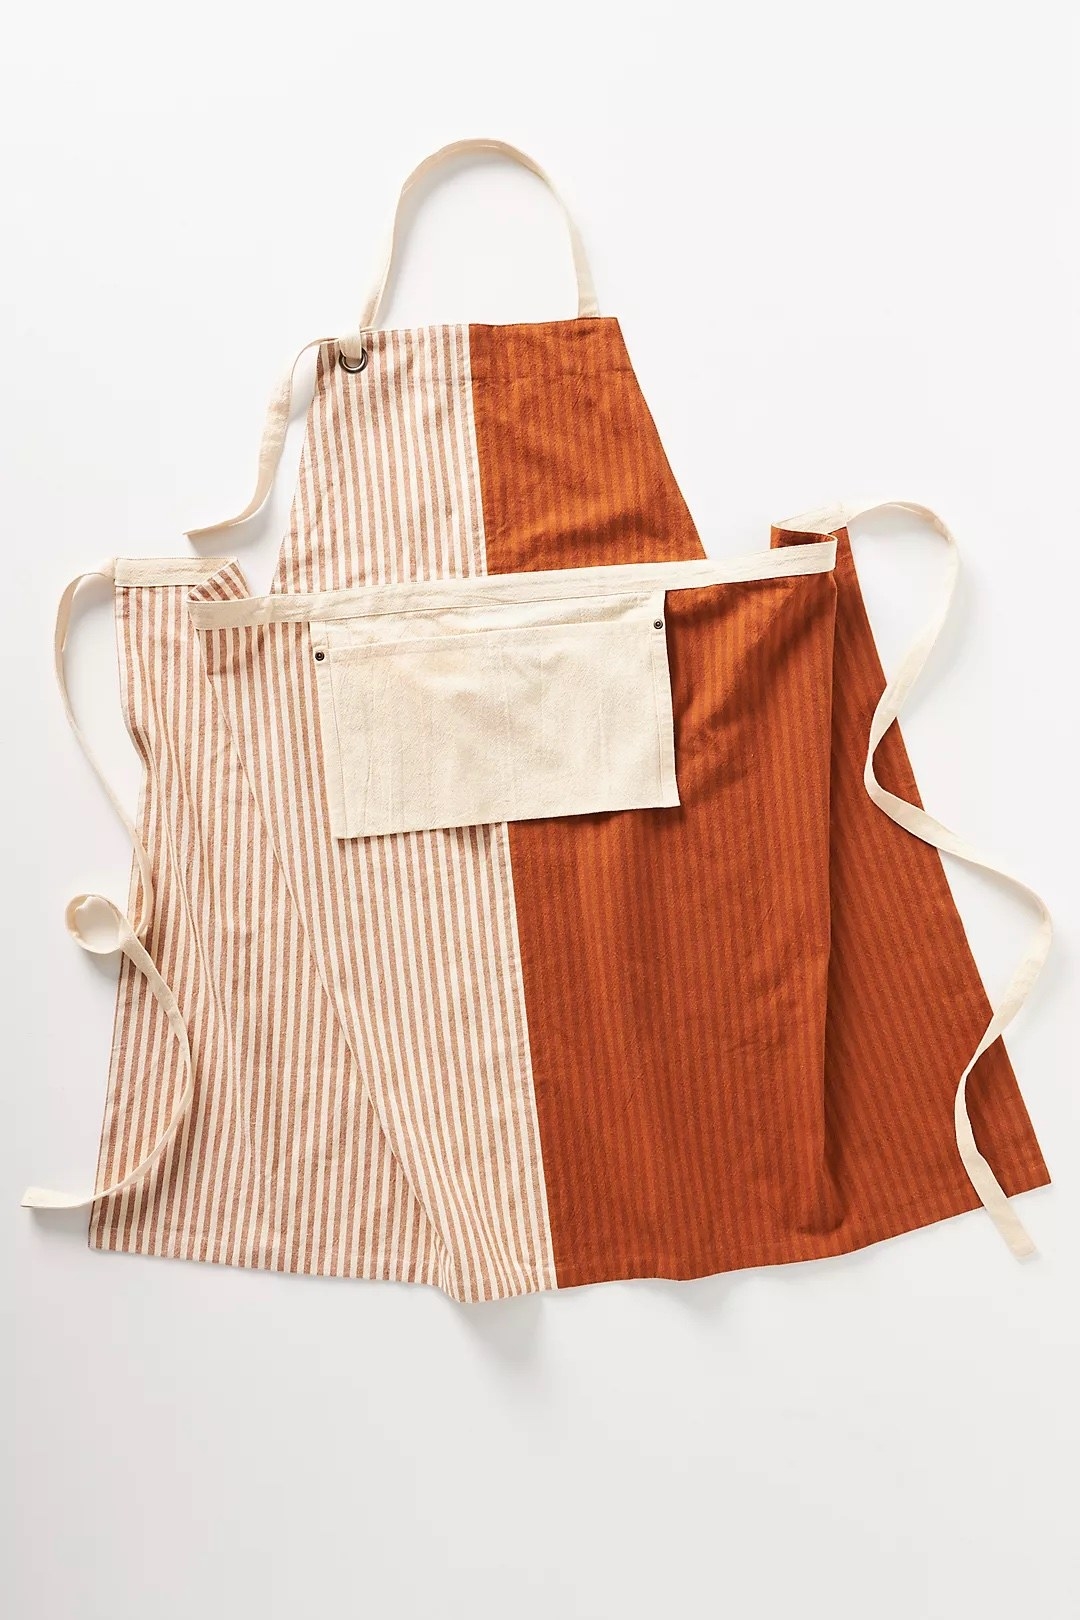 the apron with one half red and brown stripes, one half white and orange stripes and a cream pocket in the middle